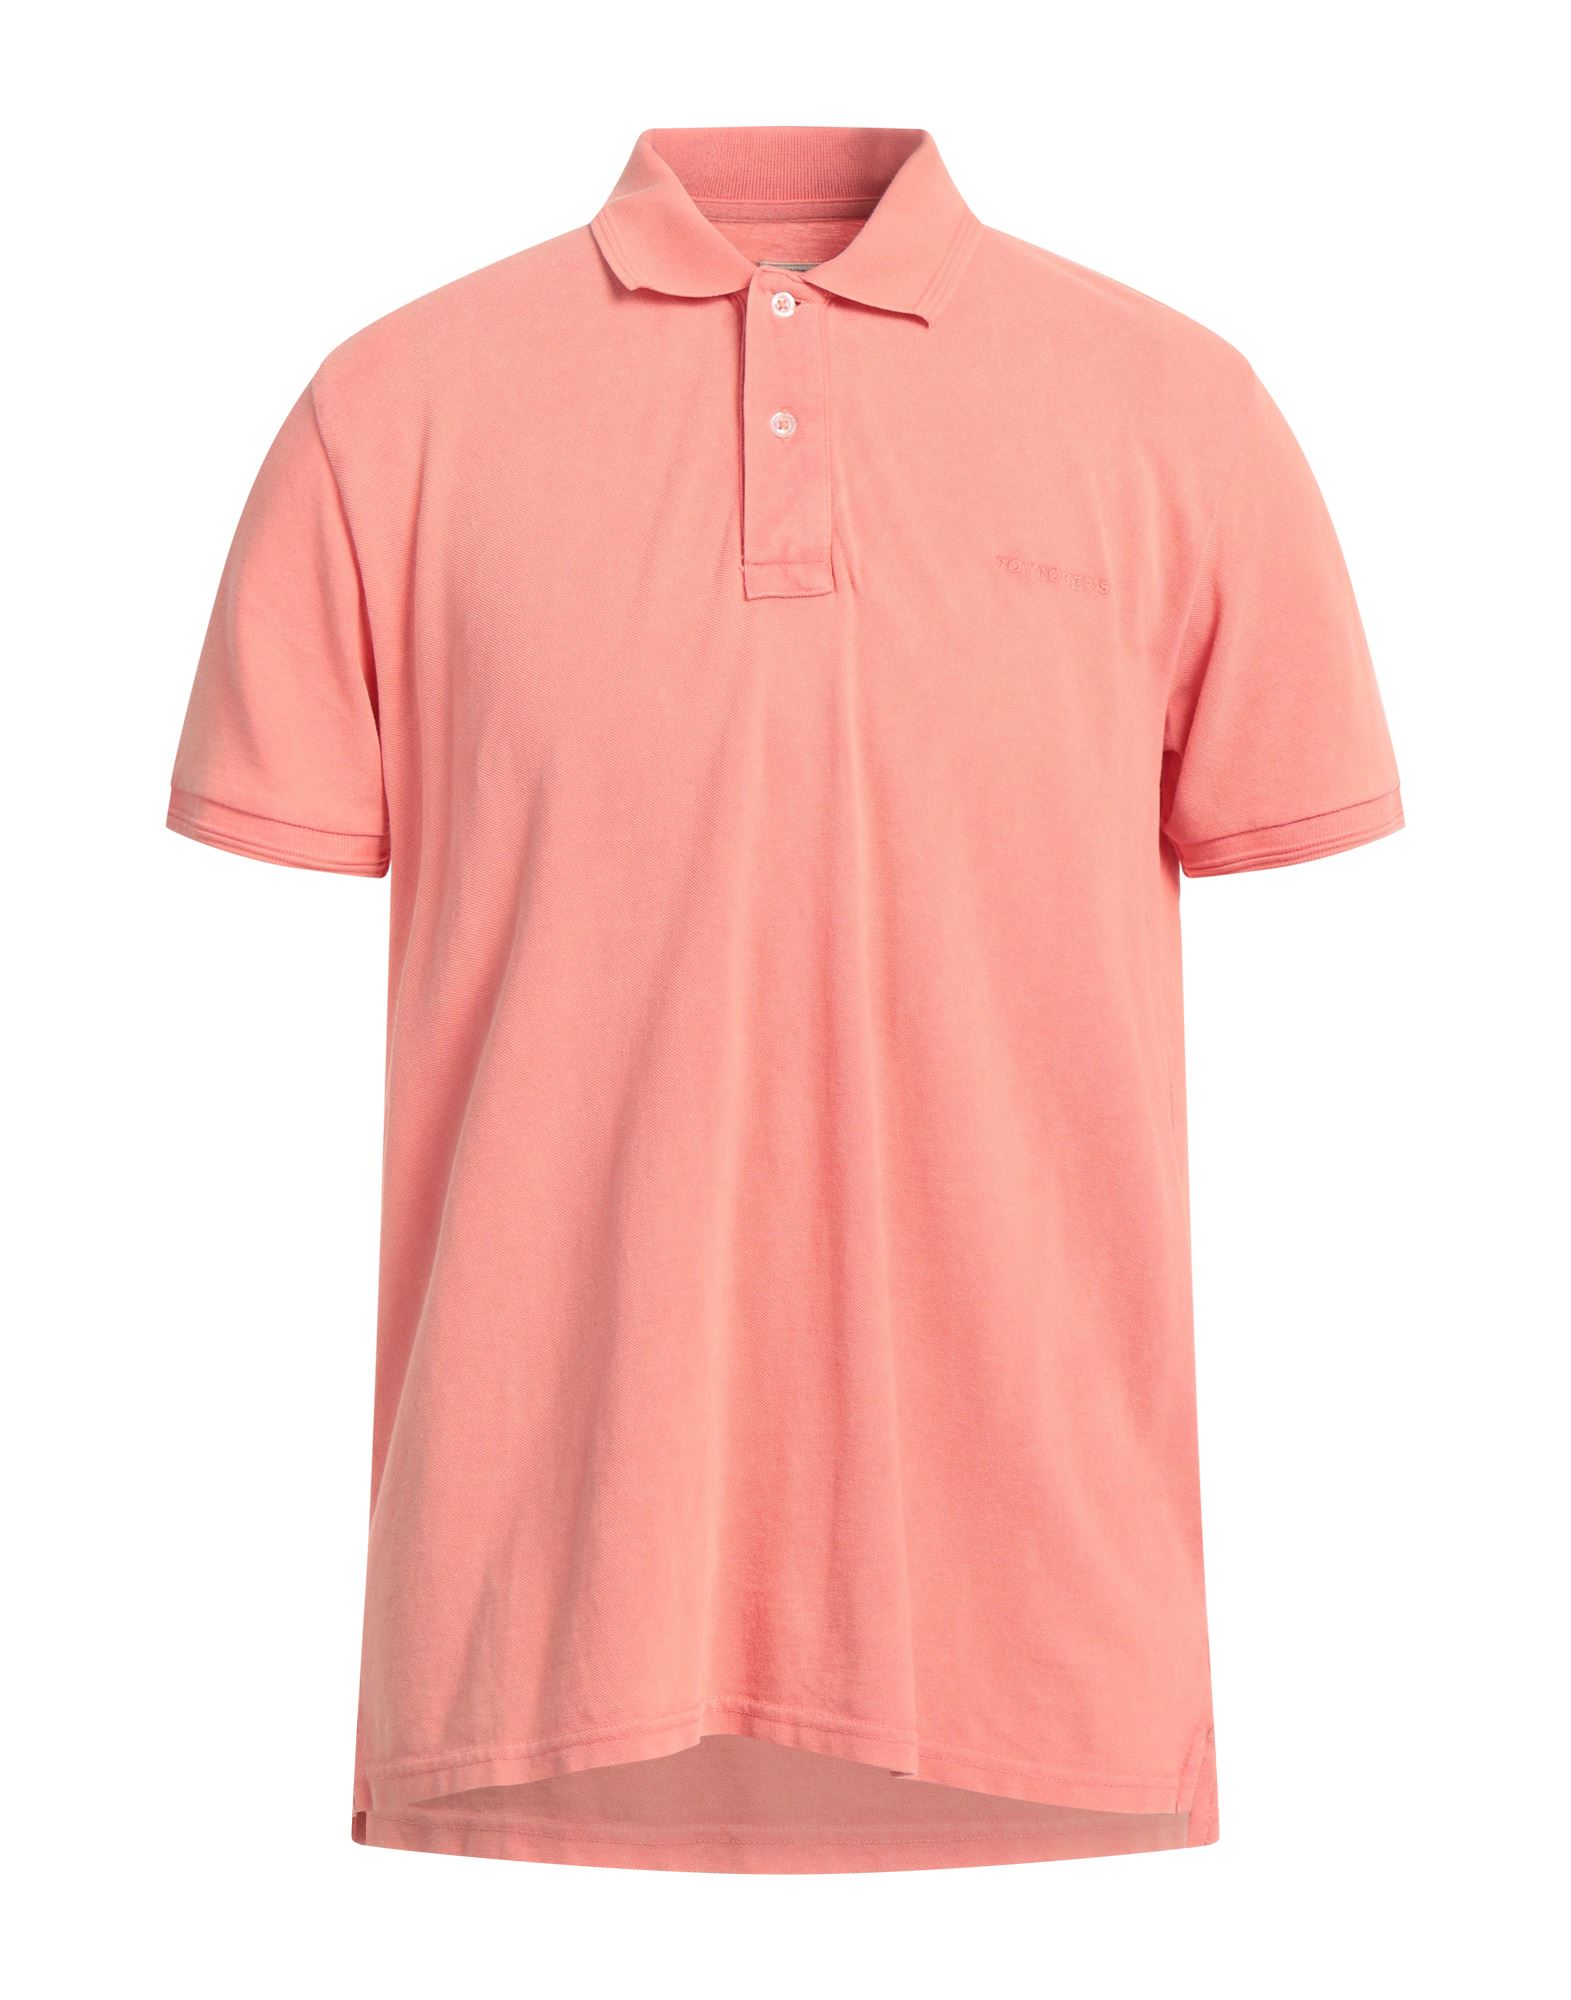 Roy Rogers Roÿ Roger's Man Polo Shirt Salmon Pink Size S Cotton